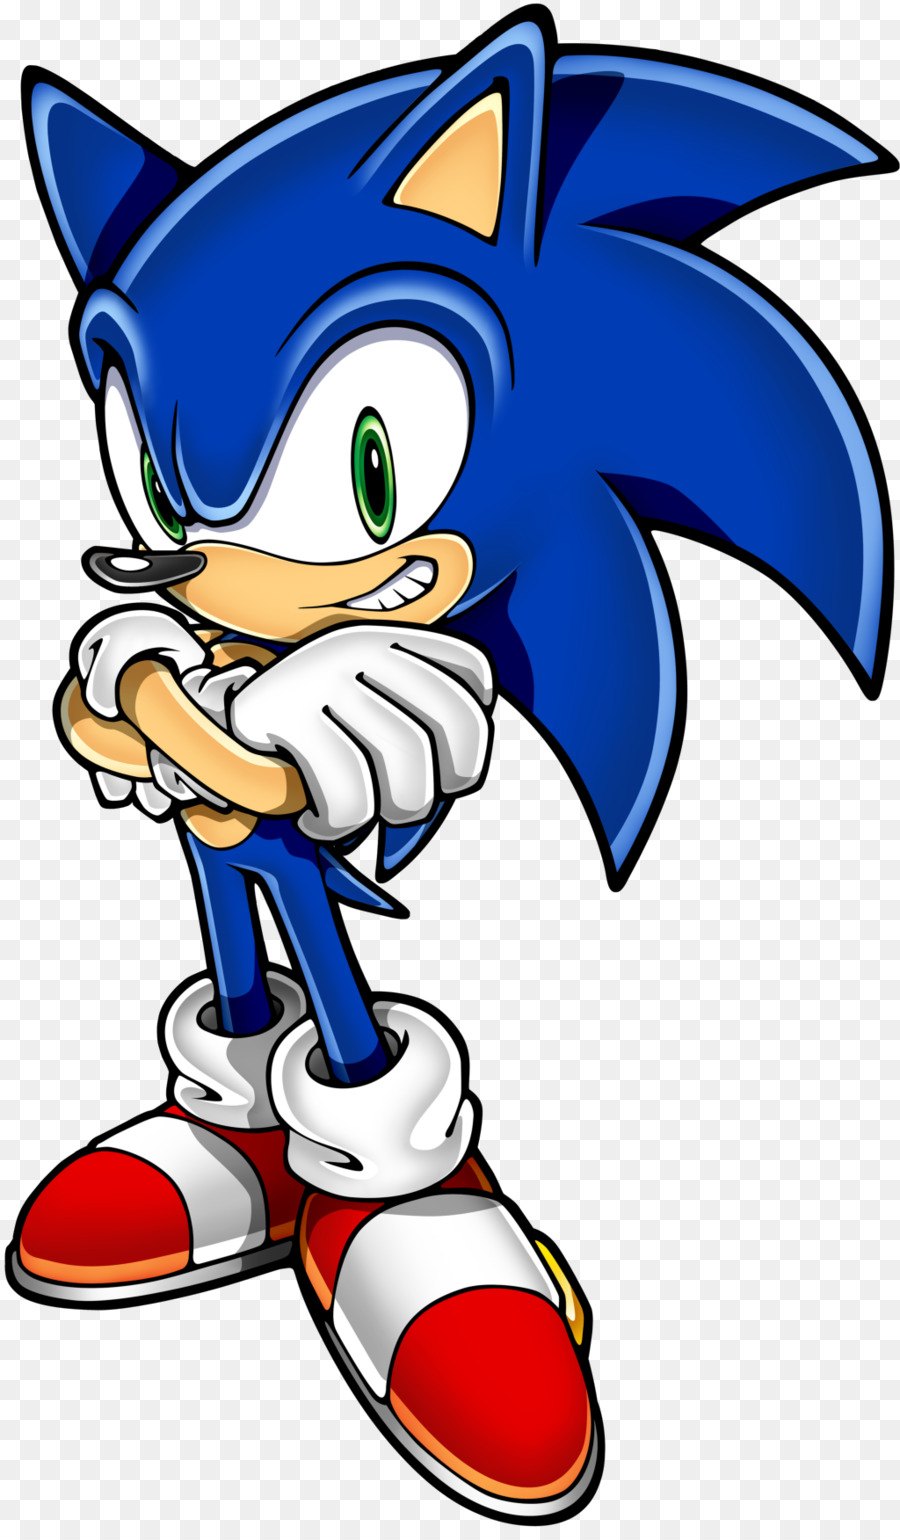 Download Sonic The Movie Hedgehog PNG Download Free HQ PNG Image, FreePNGImg